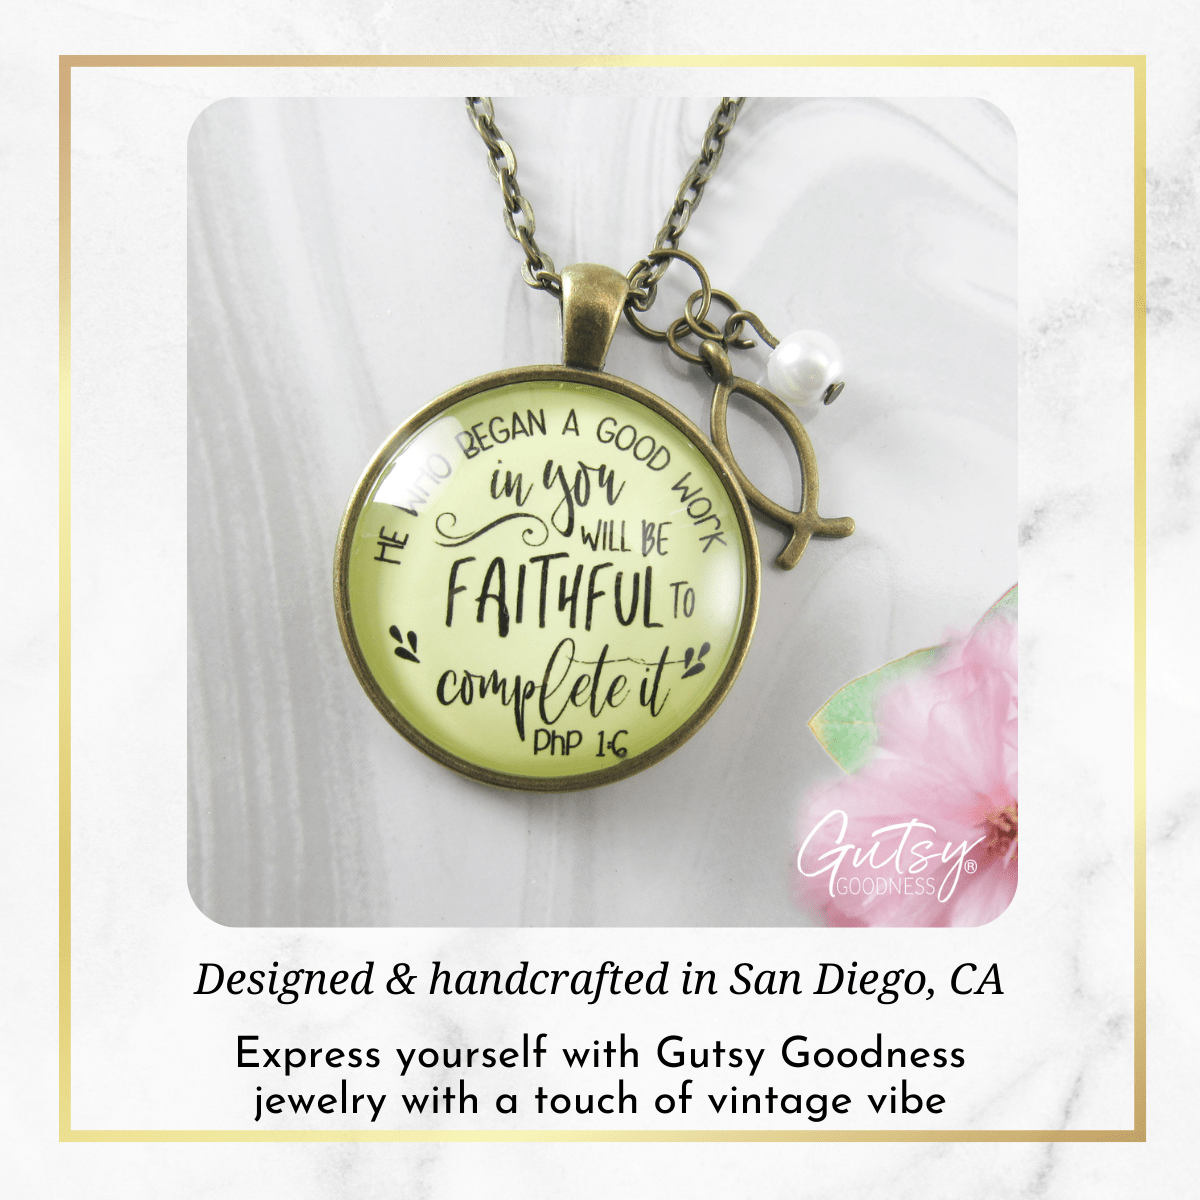 Gutsy Goodness Christian Necklace He Who Began Good Work Bible Quote Ichthys Jewelry - Gutsy Goodness Handmade Jewelry;Christian Necklace He Who Began Good Work Bible Quote Ichthys Jewelry - Gutsy Goodness Handmade Jewelry Gifts